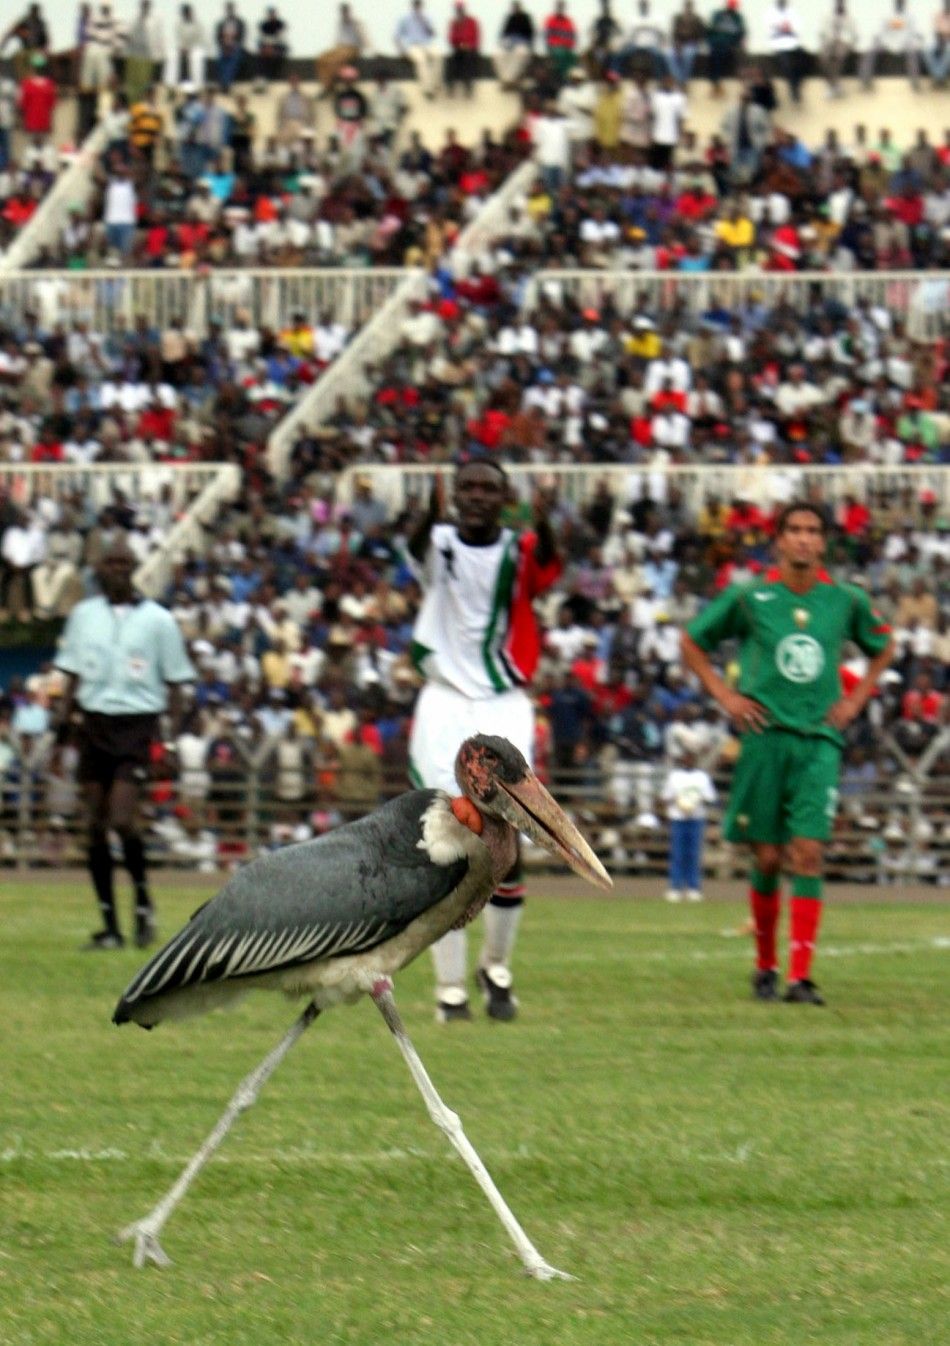 A Marabou stork walks on the soccer pitch and briefly interrupts the Kenya versus Morocco World Cup